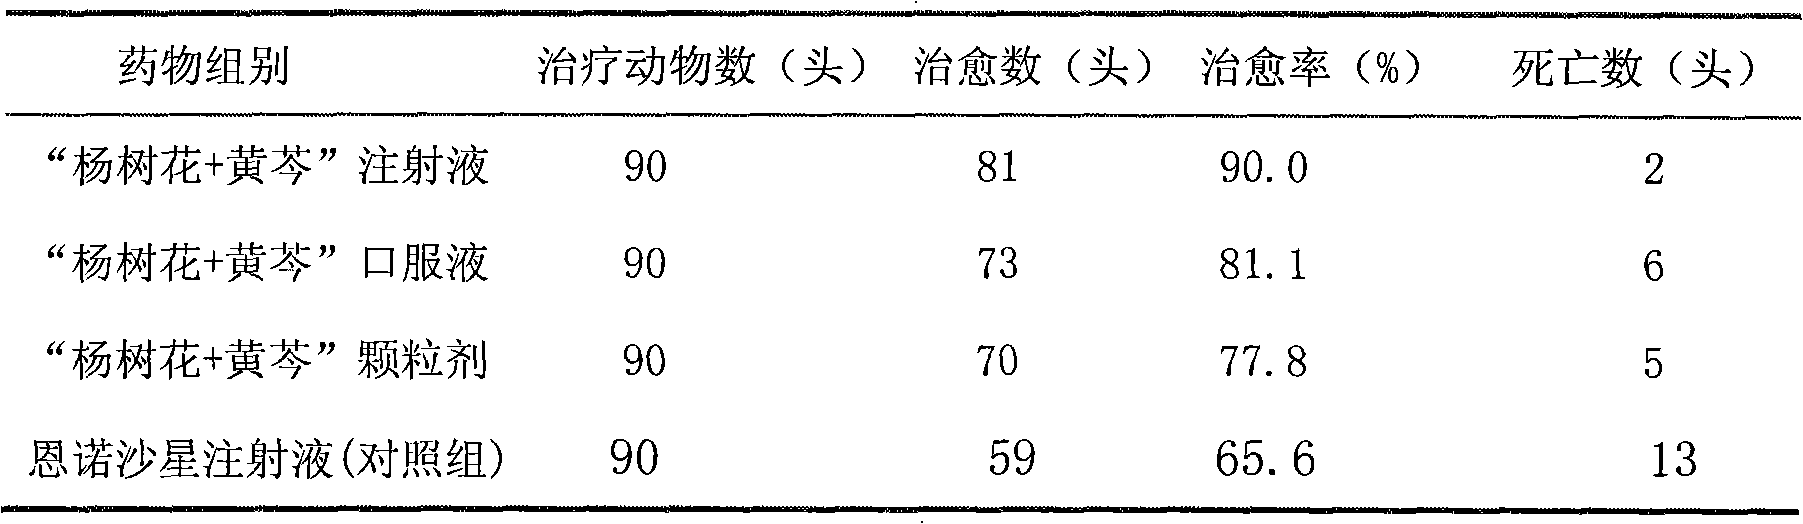 Traditional Chinese veterinary medicine composition for treating piggy diarrhea and preparation process thereof